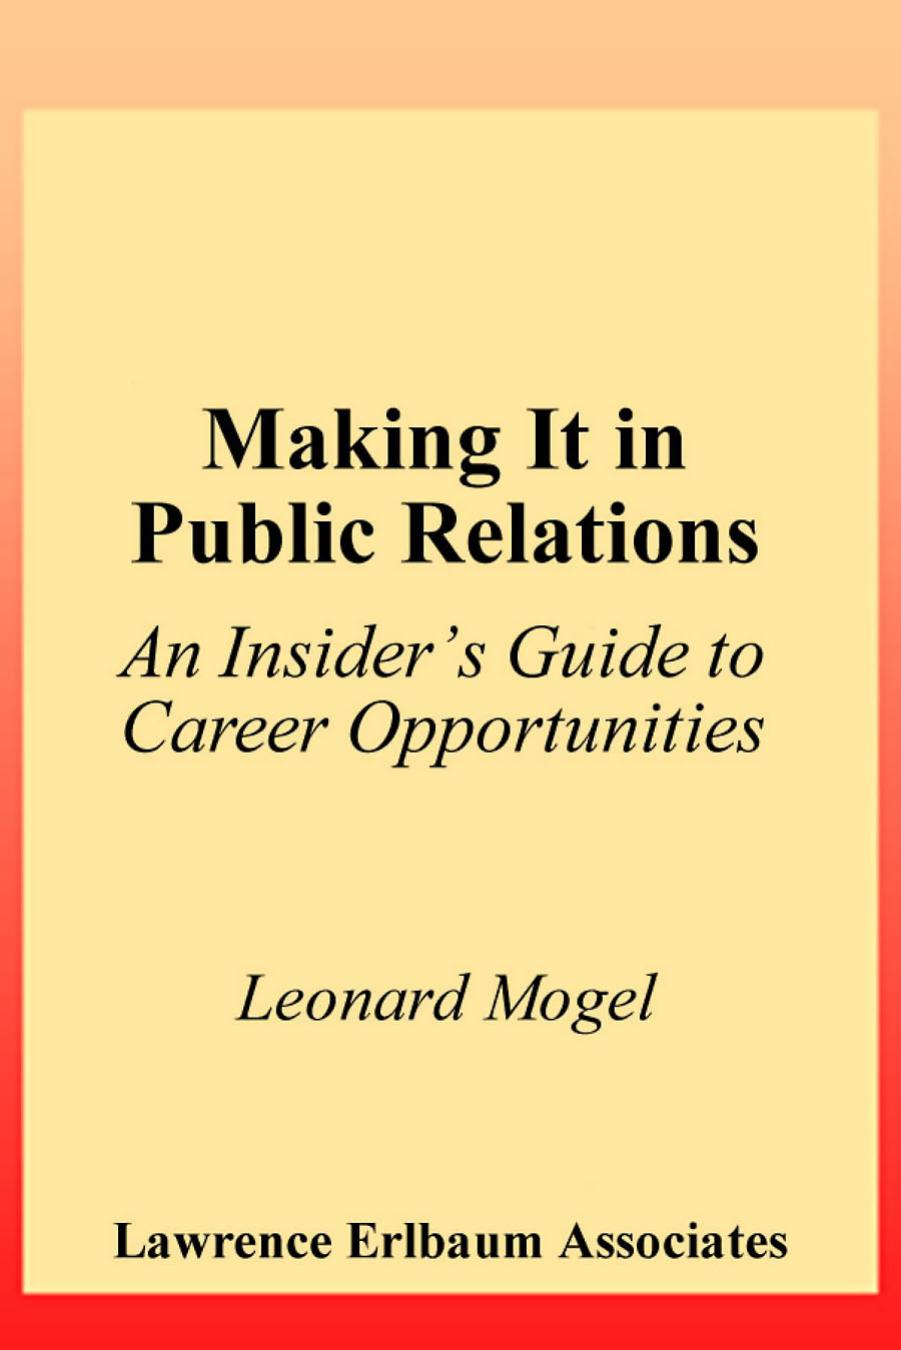 Making It In Public Relations: An Insider's Guide to Career Opportunities, Second Edition